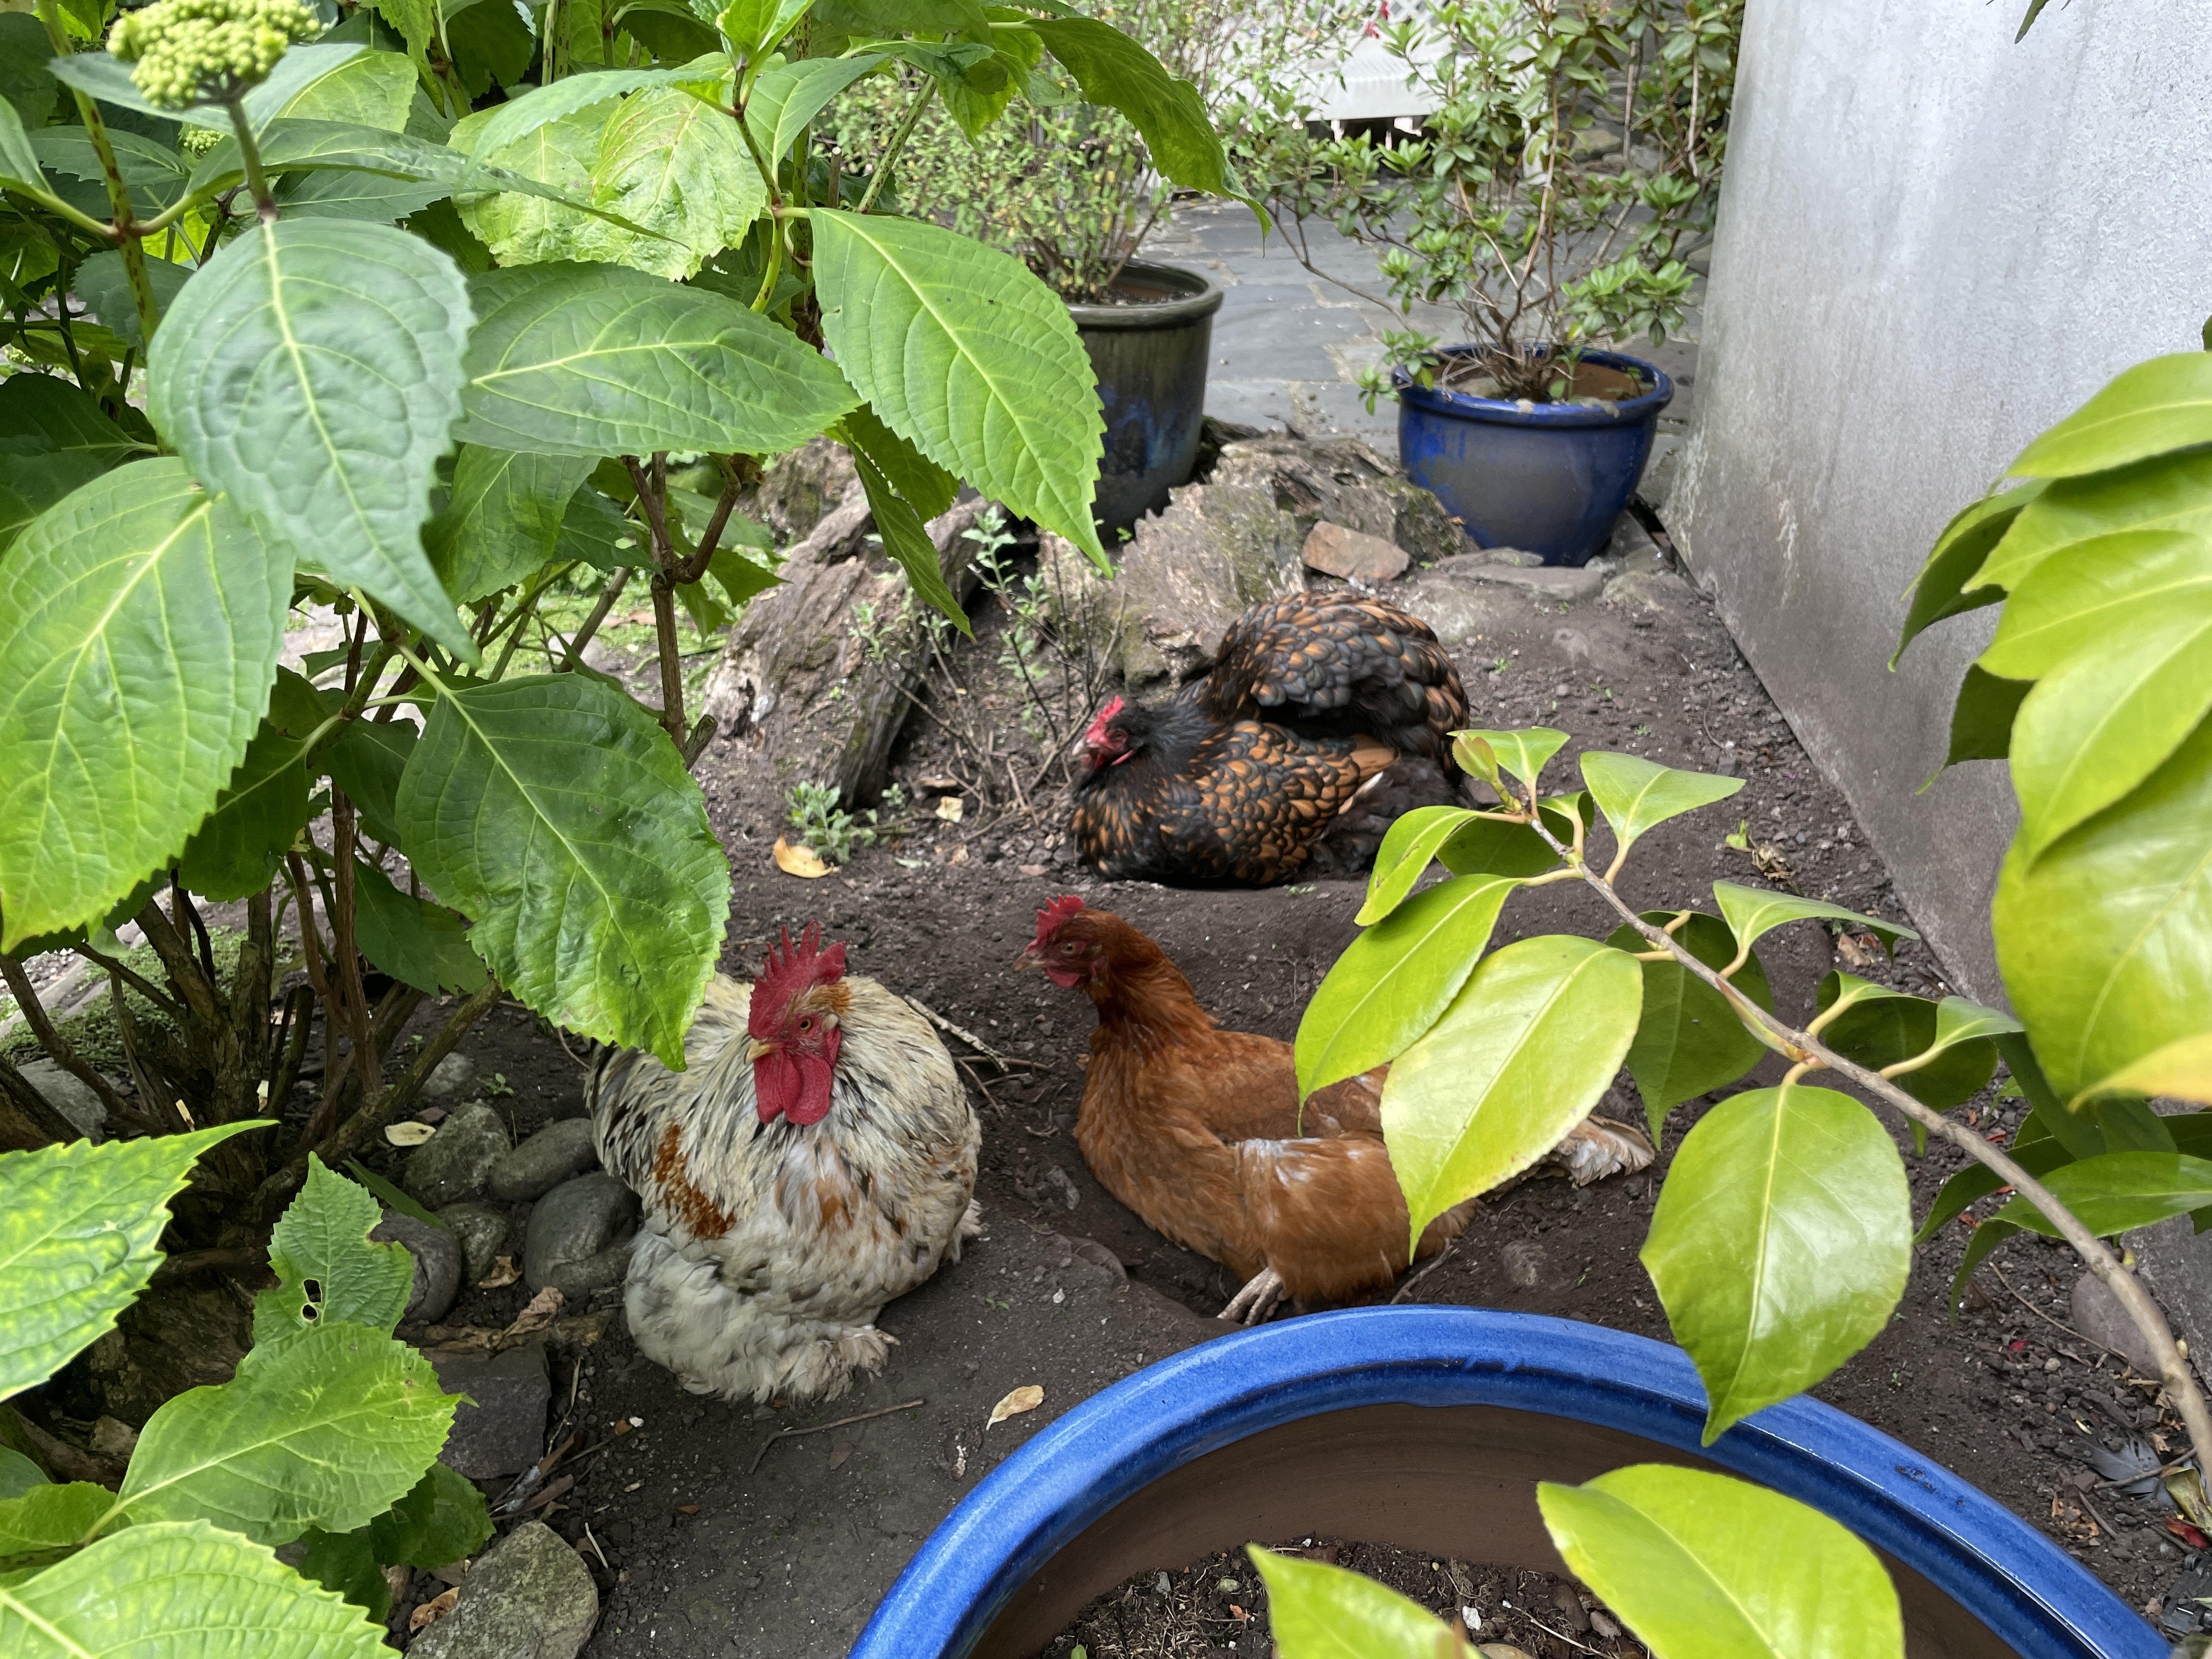 Three chickens hanging out in a garden.